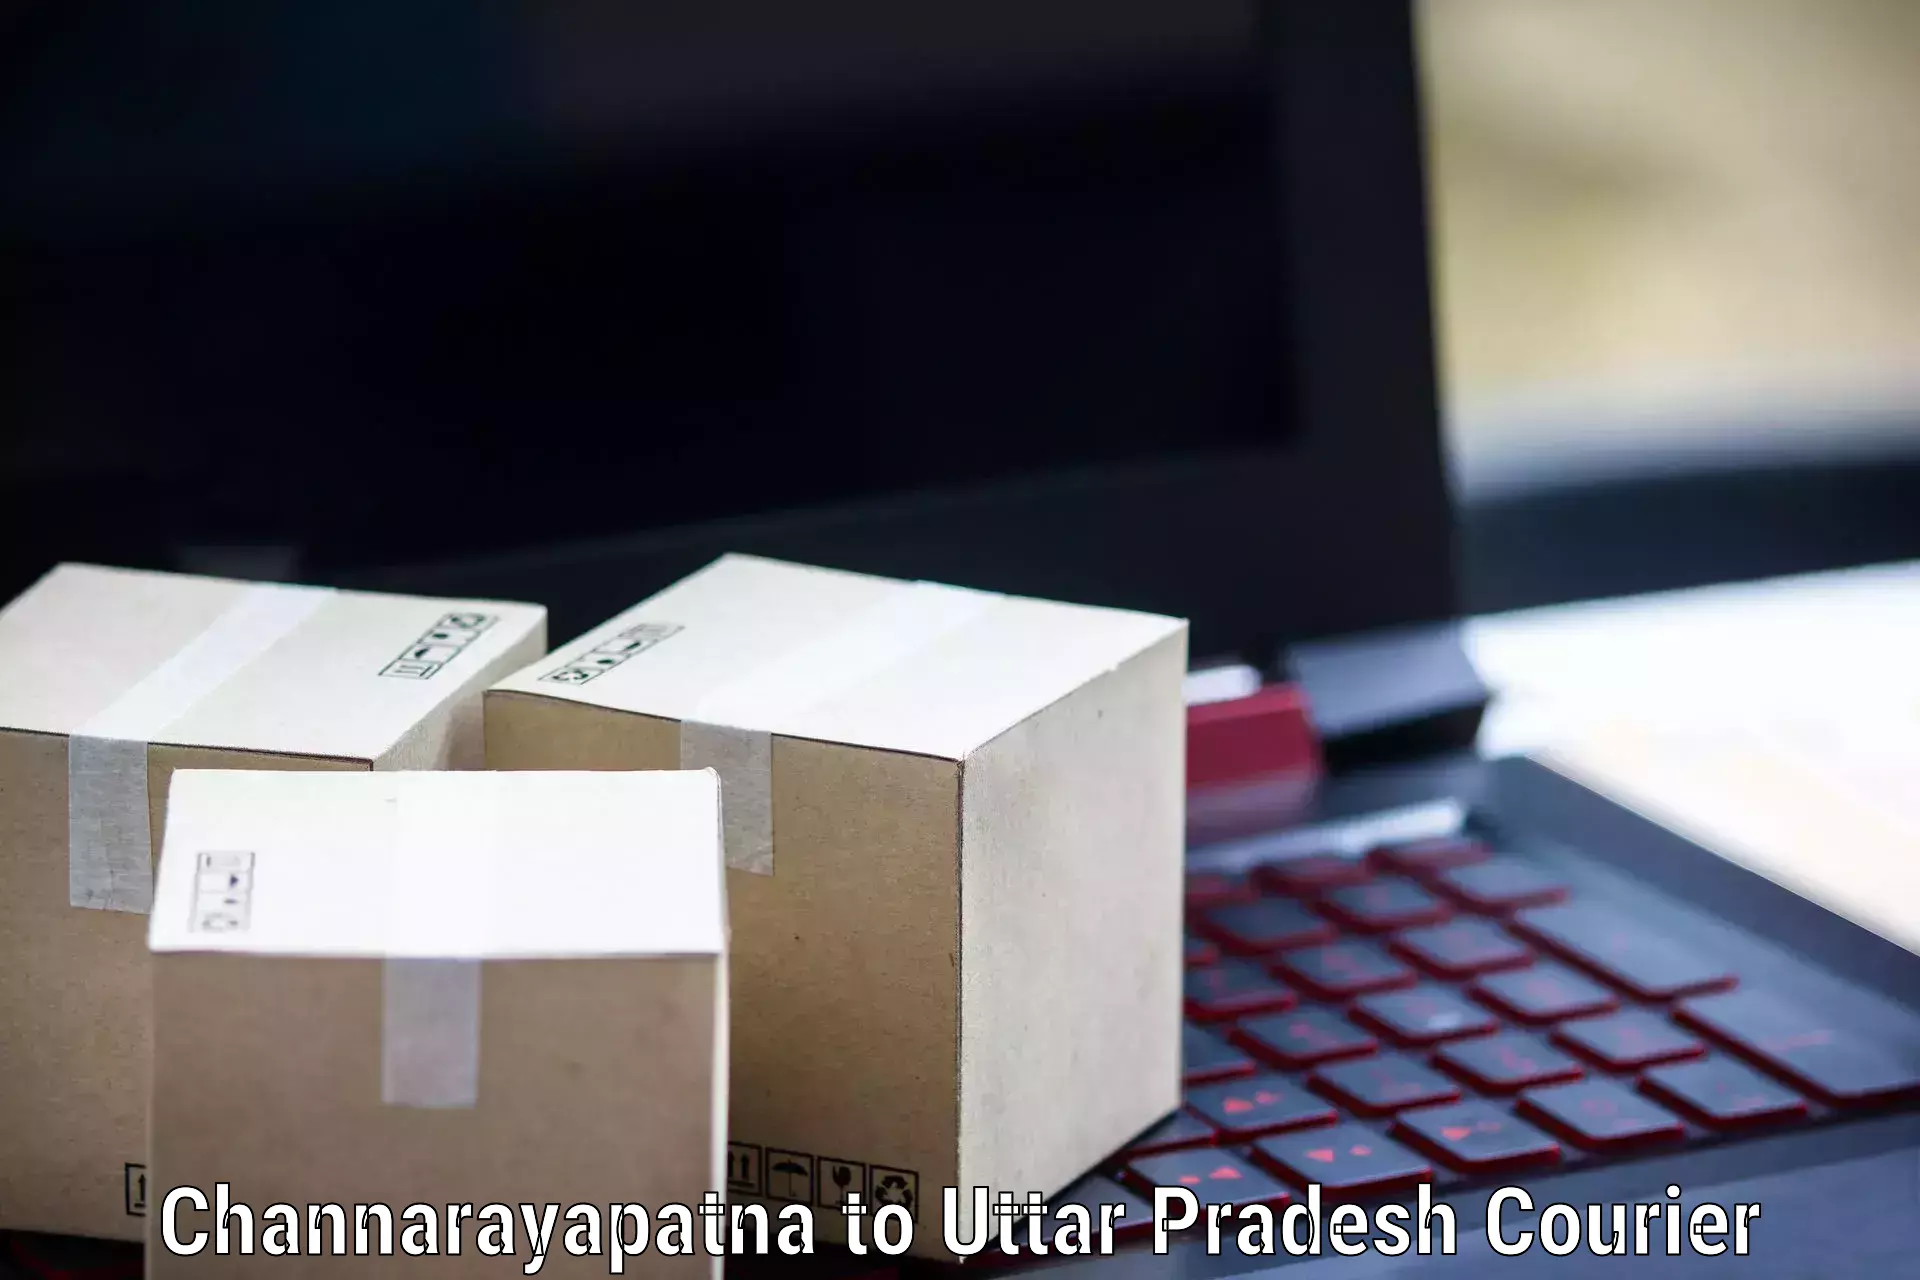 Reliable courier services in Channarayapatna to Rampur Maniharan